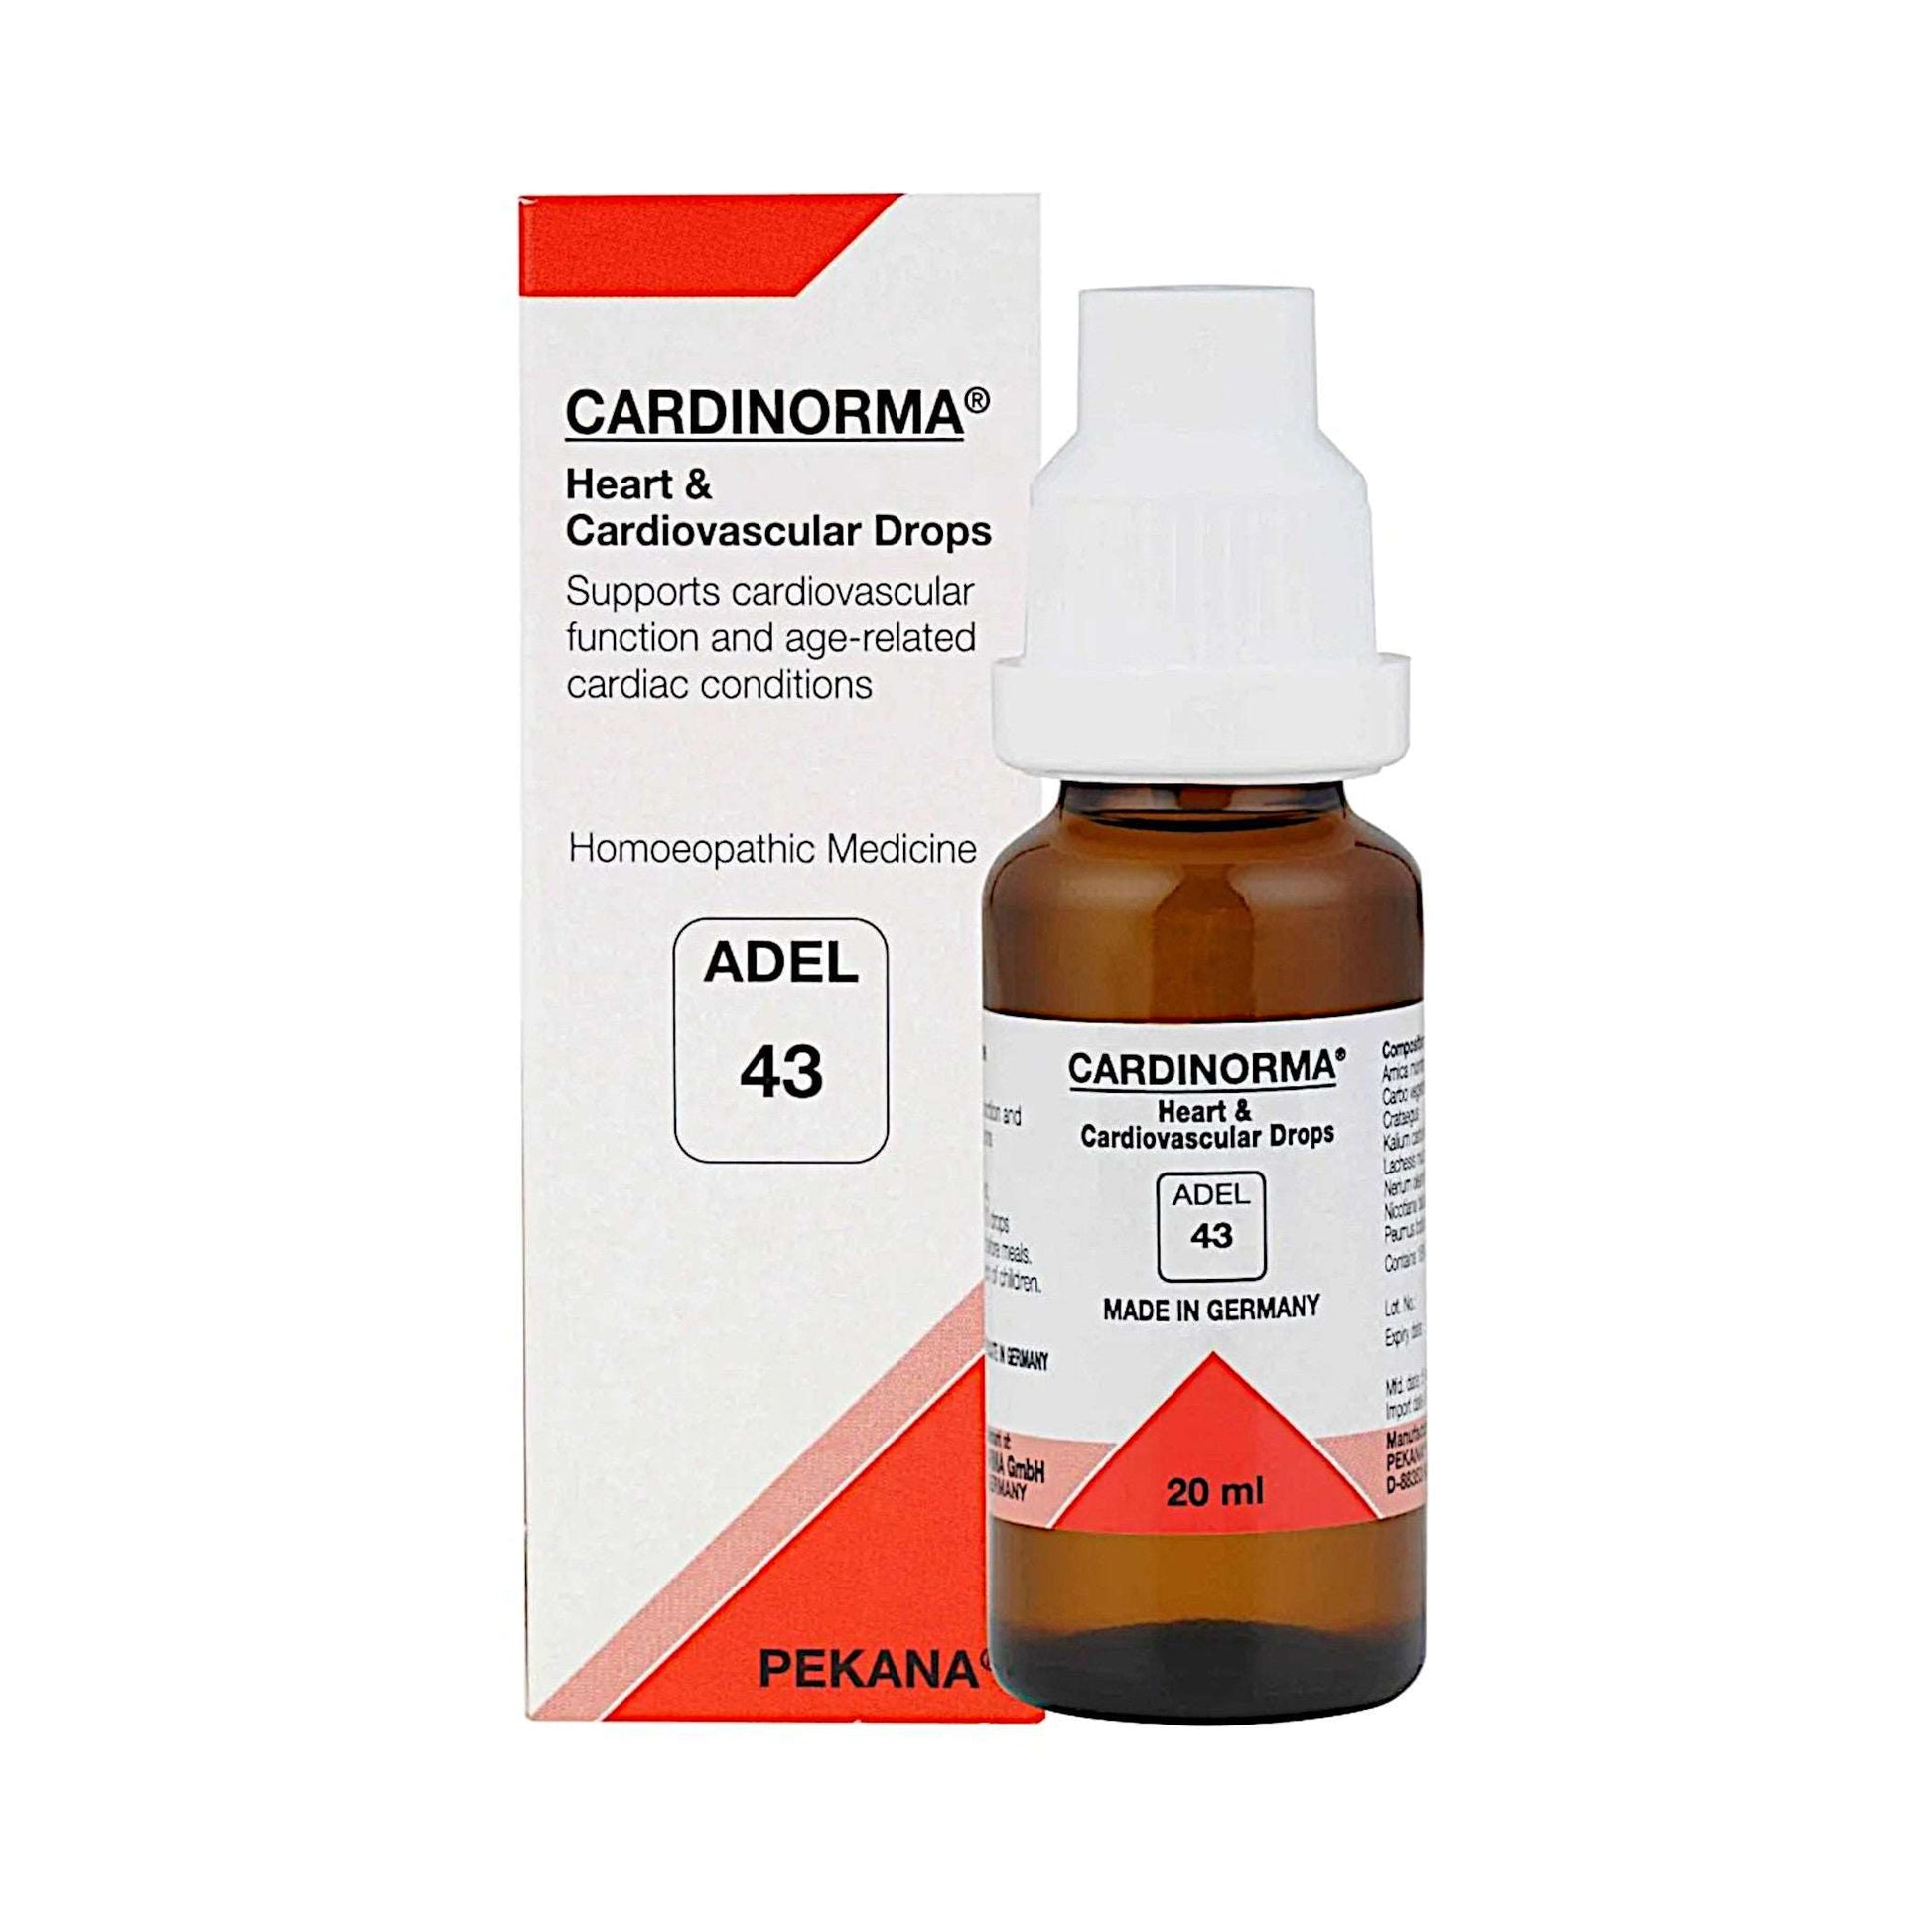 Image: ADEL43 Cardinorma Drops 20 ml: Homeopathic Support for Heart Health.